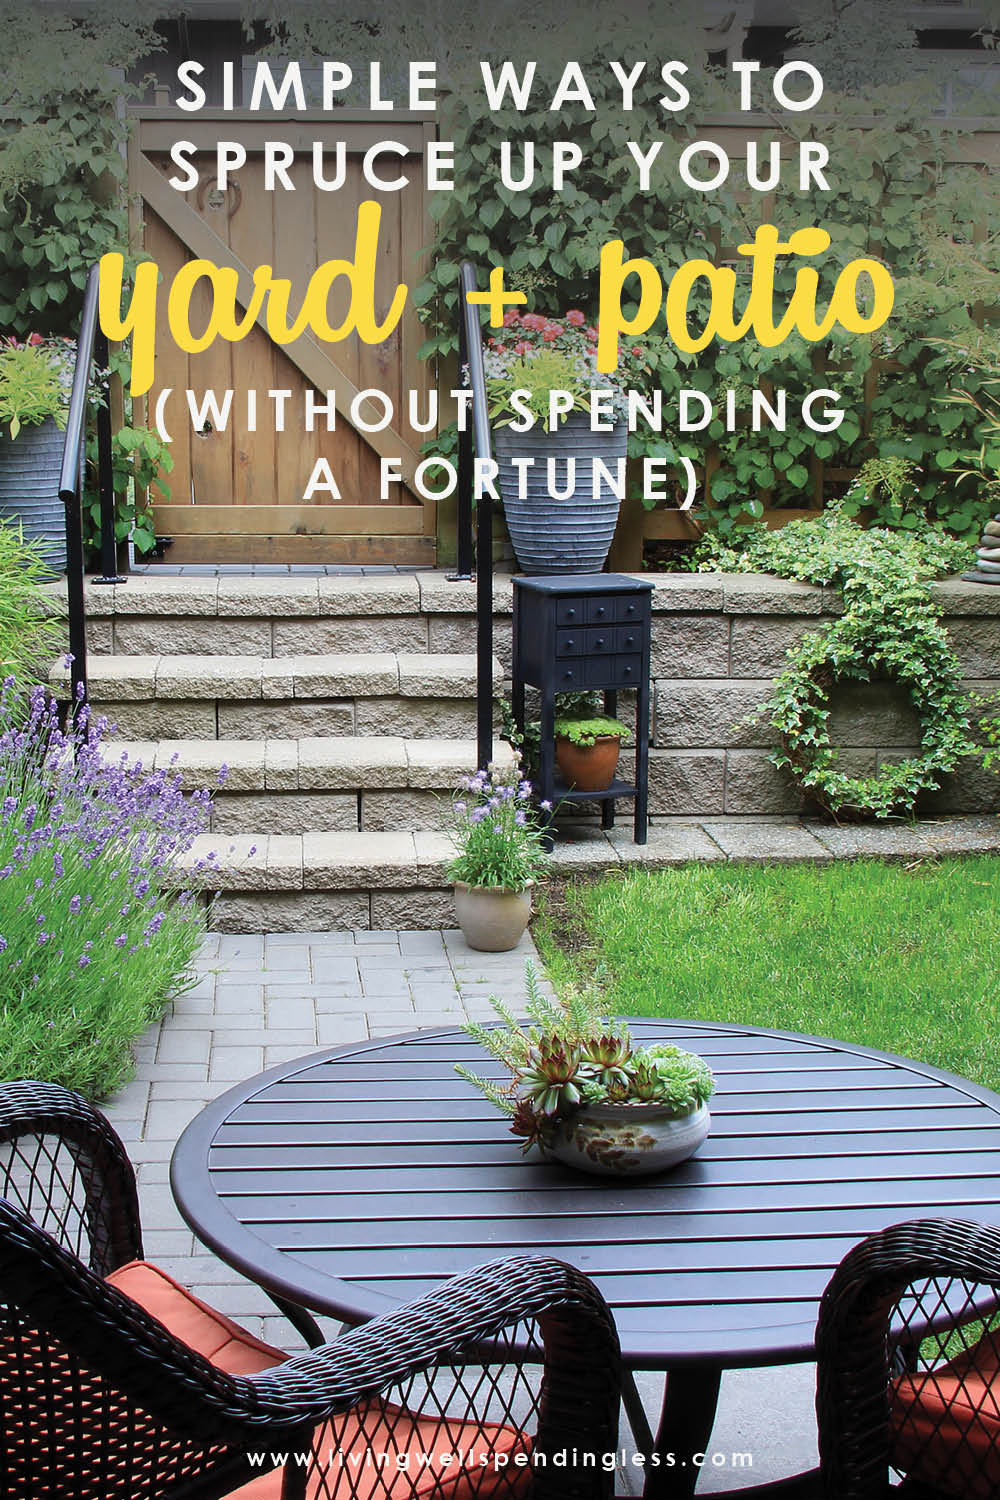 Need to spruce up your yard and patio? These tips will help you clean and refresh your outdoor surfaces like concrete, decking, patio furniture and more! #yard #cleaning #decluttering #springcleaning #yardtips #outdoors #patio #patiotips 